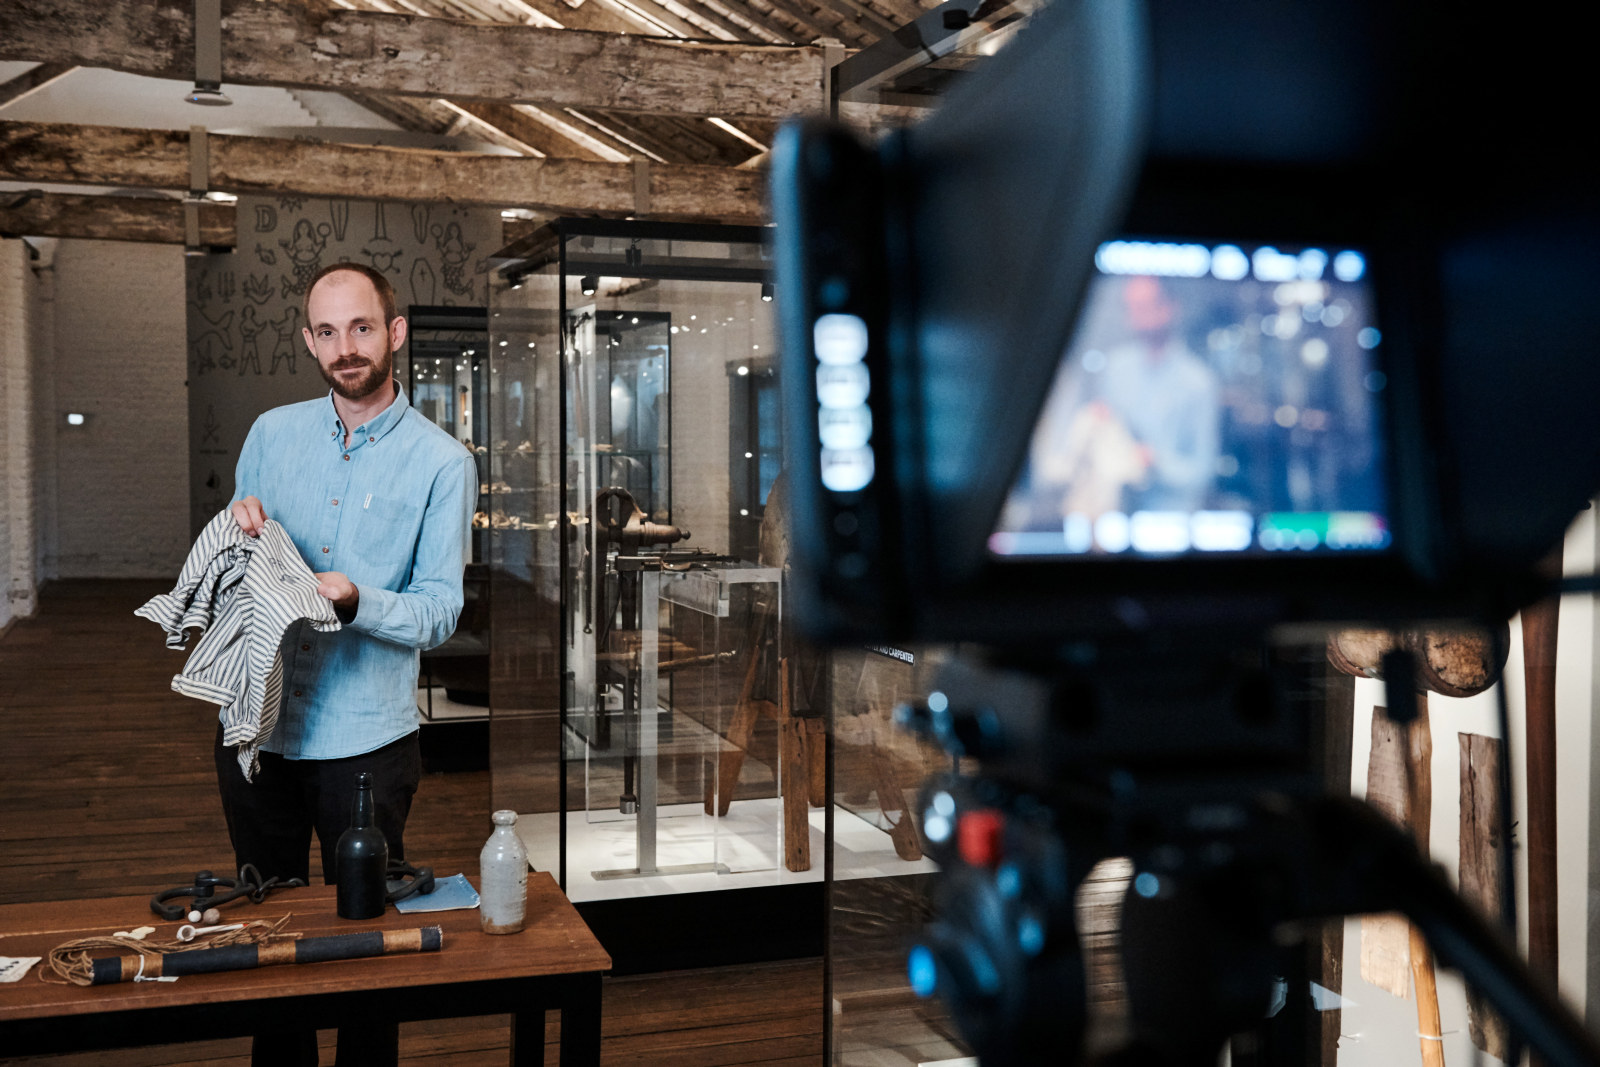 Carlin de Montfort, curator, holds up a convict shirt to the camera during a virtual excursion. He is standing behind a table of historical objects in the Meet the Convicts room on the top floor of the Hyde Park Barracks.